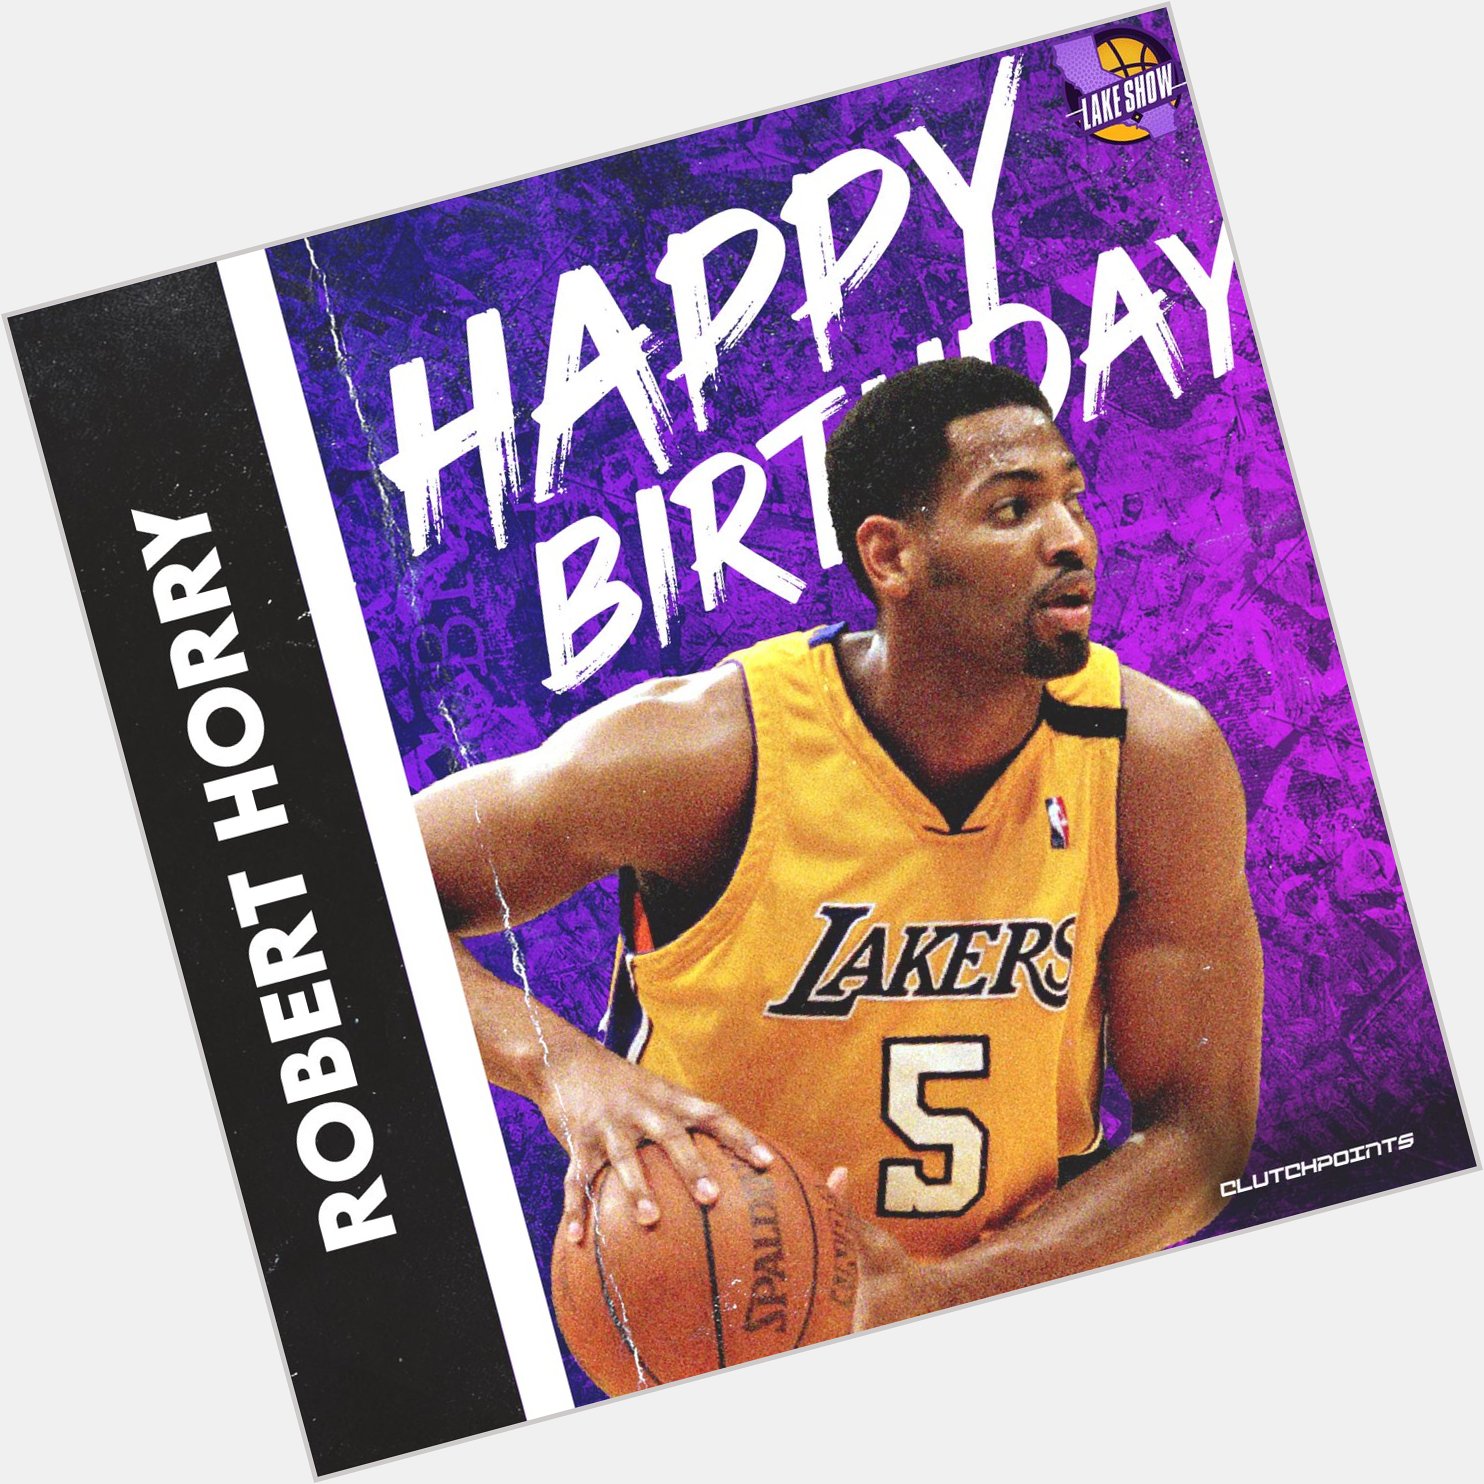 Lakeshow, let\s all greet Robert Horry a happy 51st birthday!  